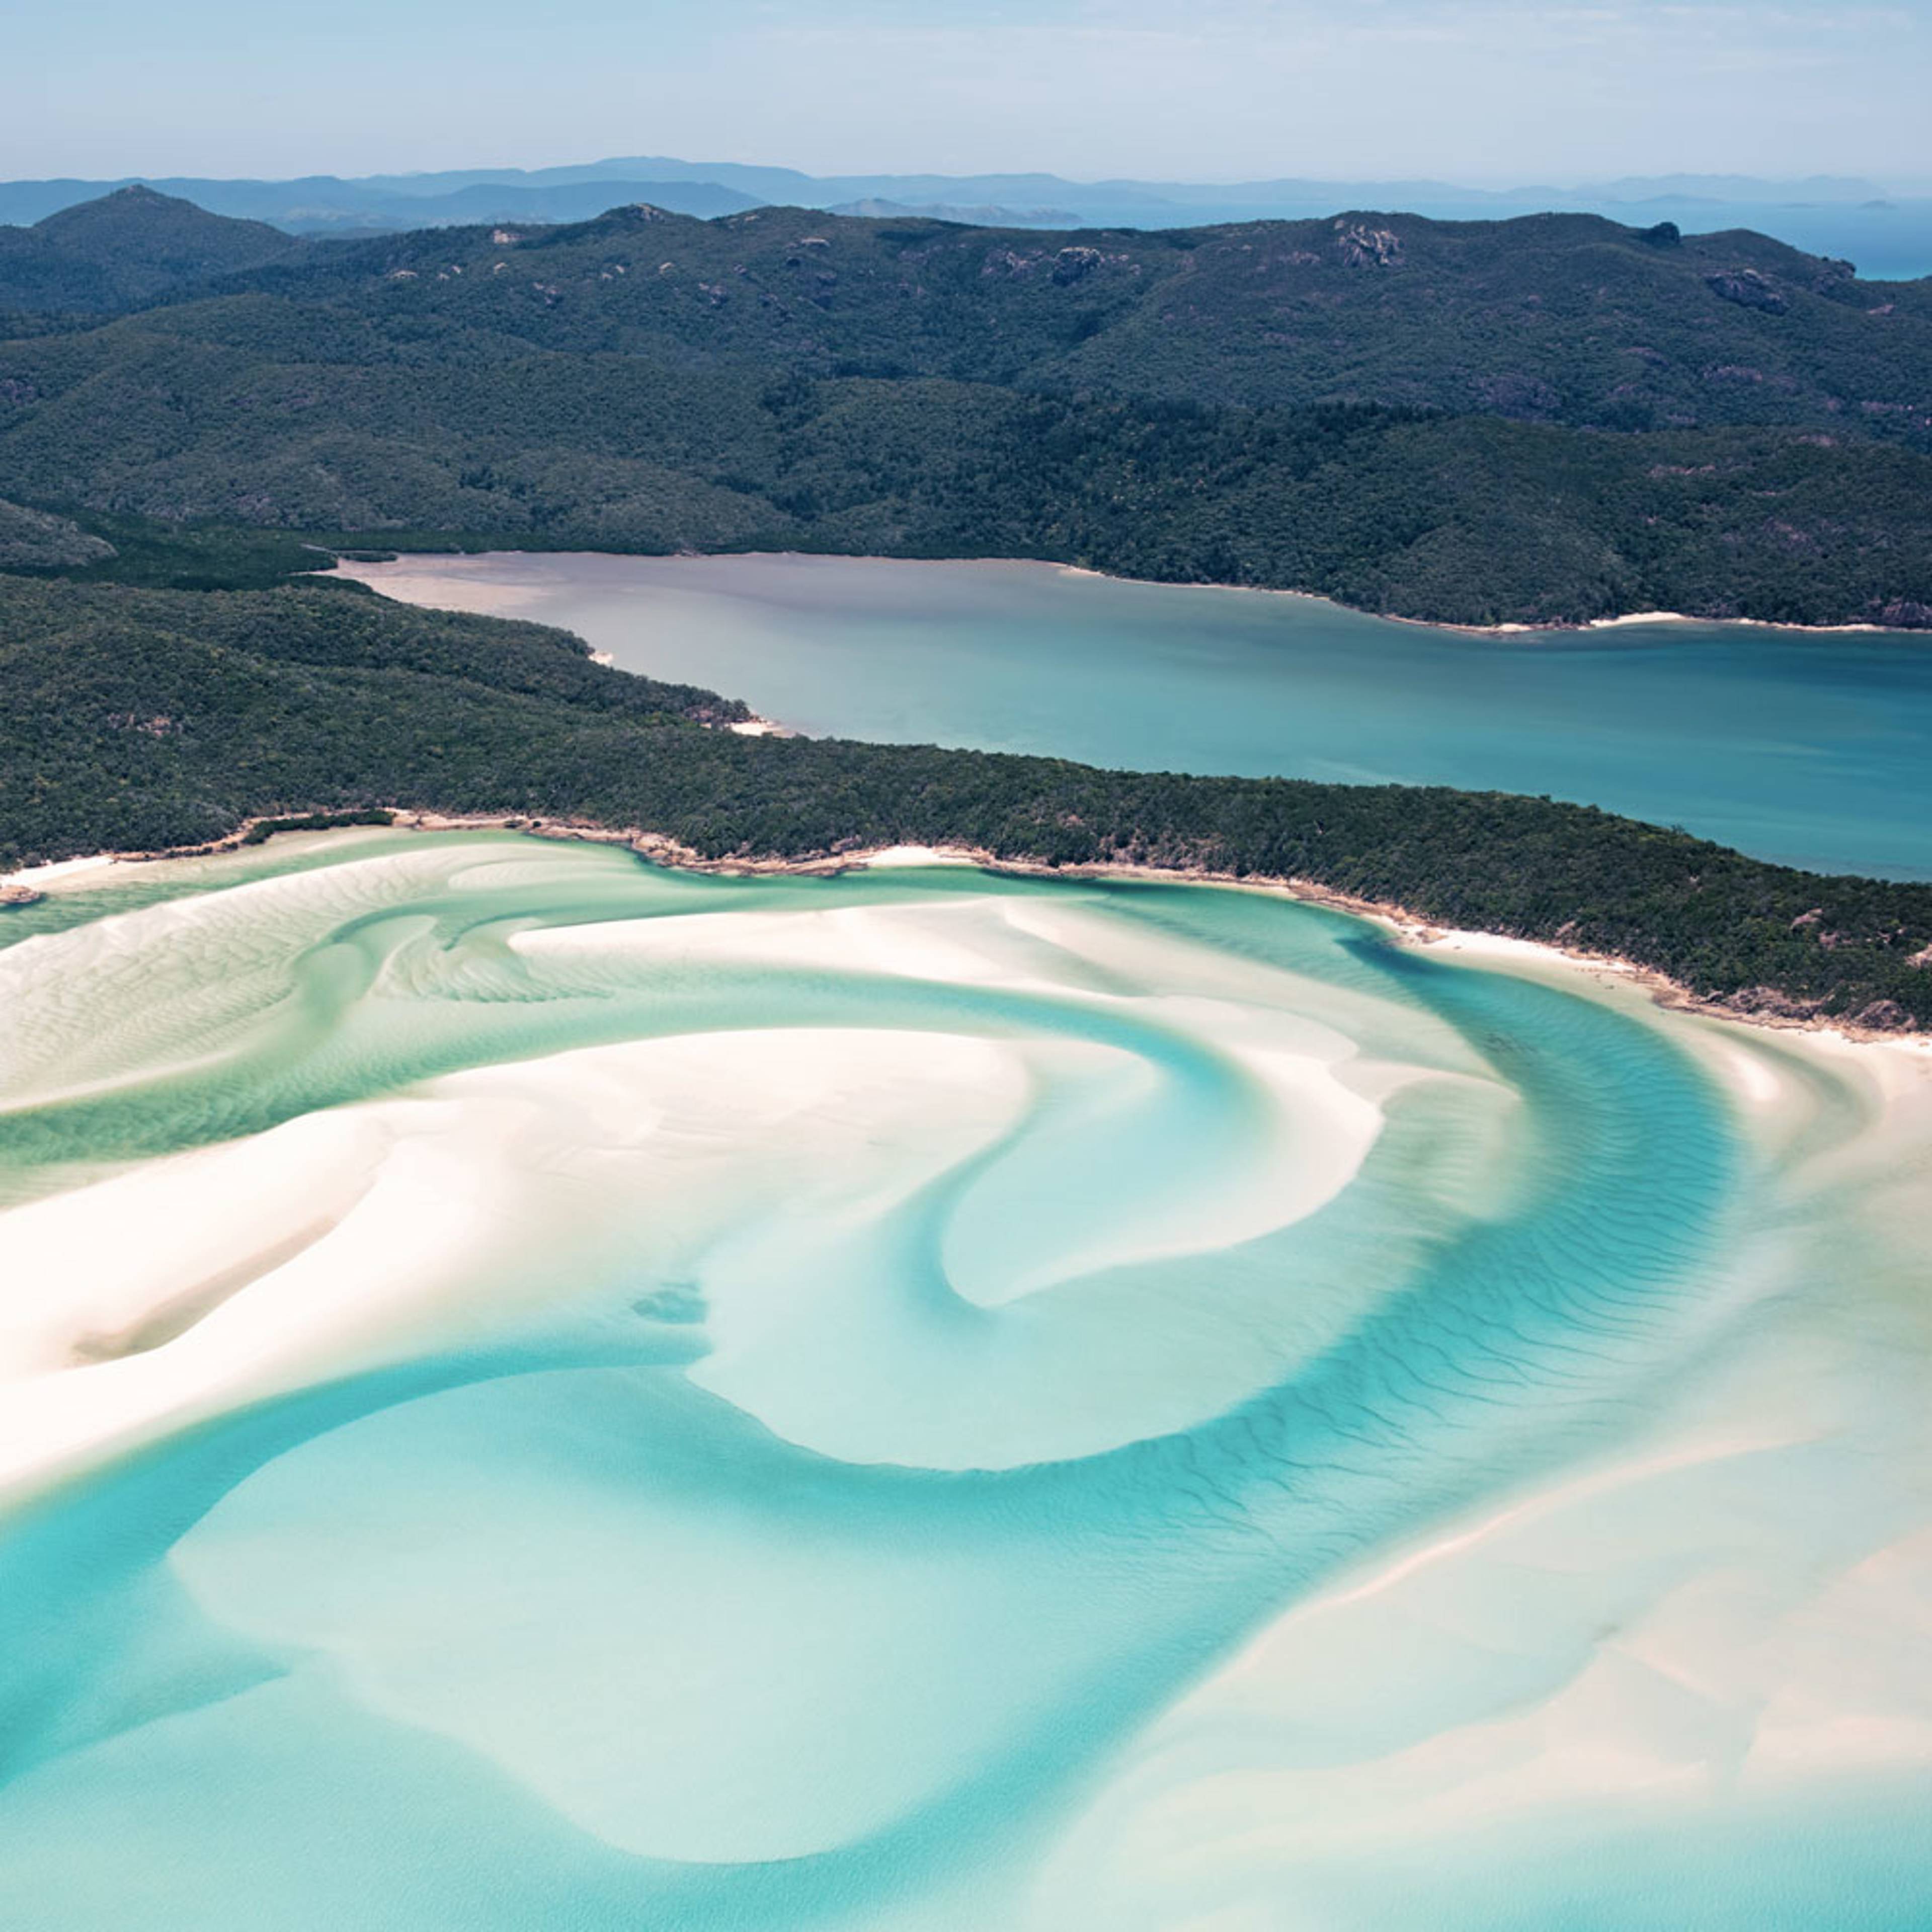 Design your perfect tour of Australia's beaches with a local expert